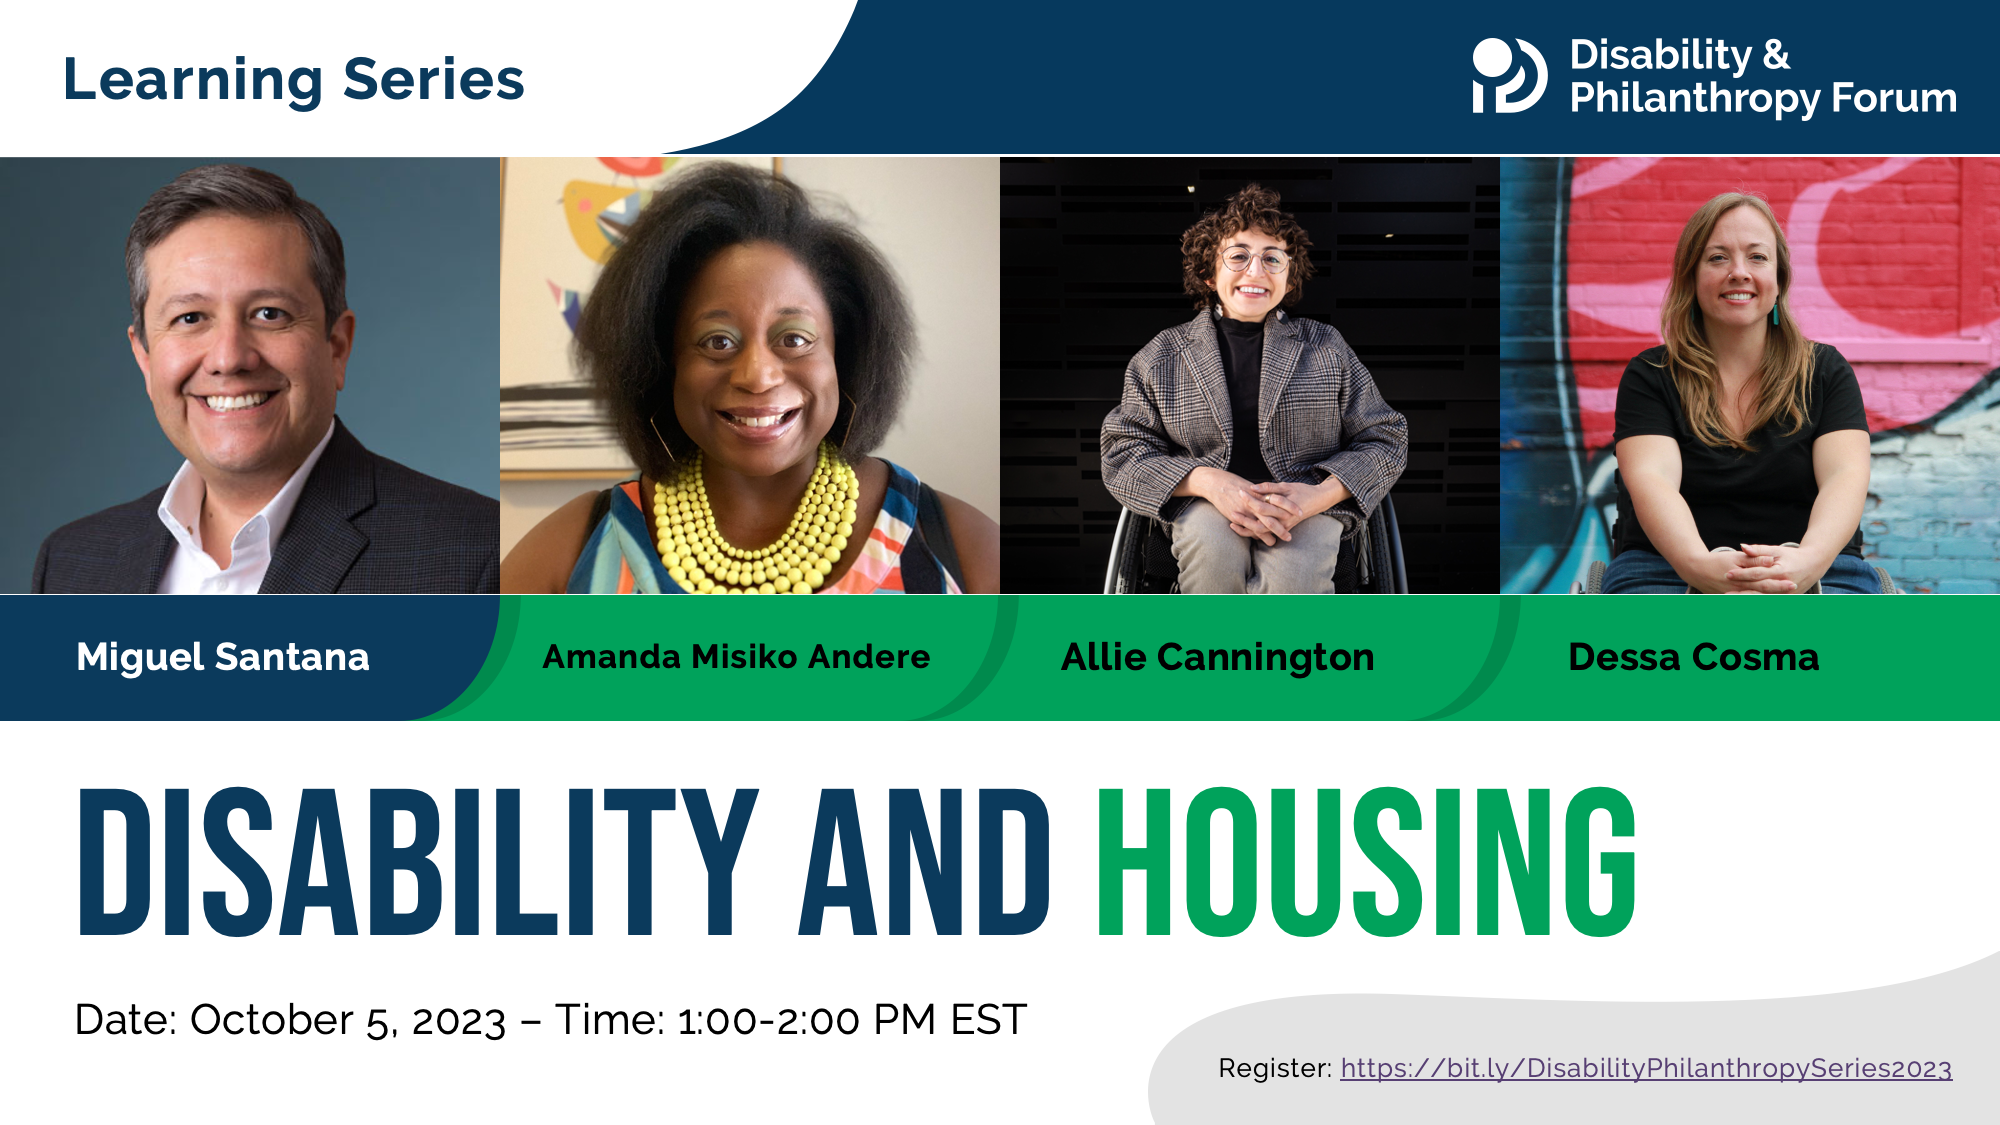 Webinar graphic with a blue and green color scheme. At the top right is the Disability & Philanthropy Forum logo next to text that reads "Learning Series." Below the logo are color photos of webinar moderator Miguel Santana and panelists Amanda Misiko Andere, Allie Cannington, and Dessa Cosma. Below the photos is text that reads “Disability and Housing.” The date of the event is October 5, 2023 at 1:00pm ET.